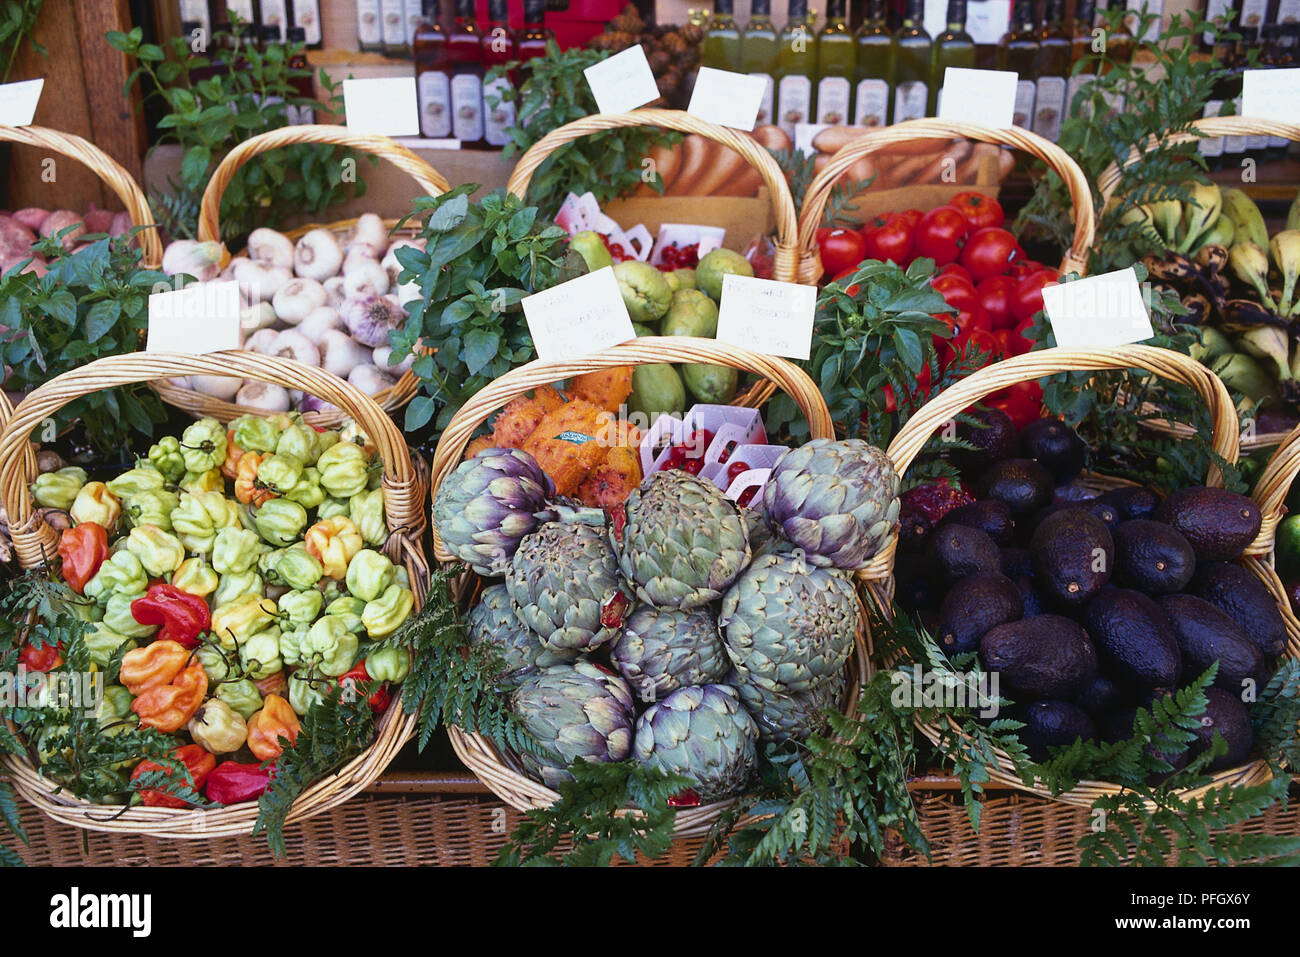 Baskets of vegetable on a market stall Stock Photo